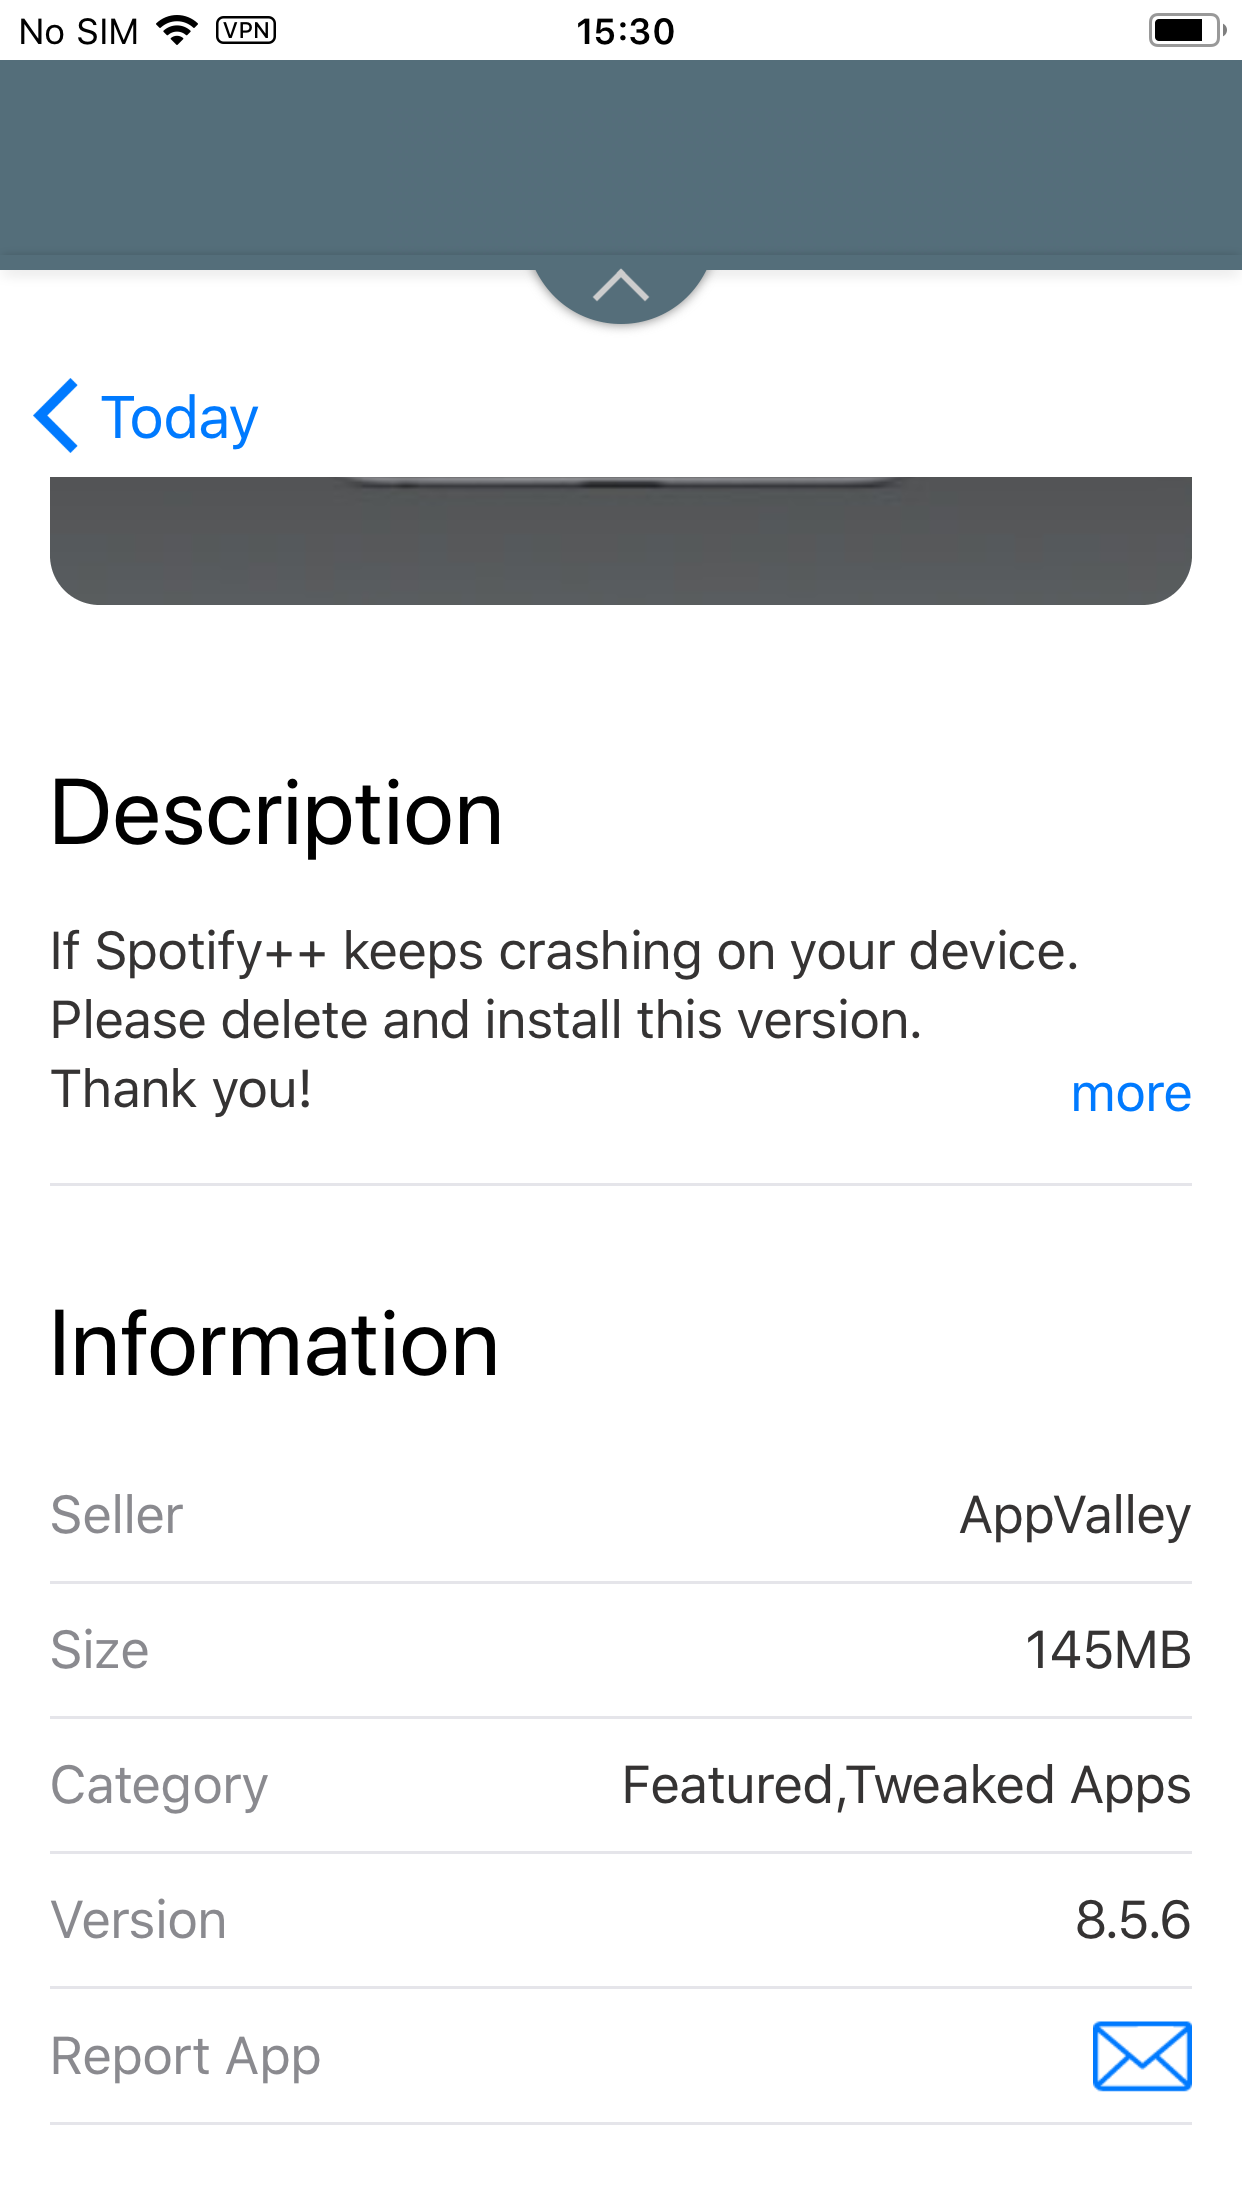 Spotify++ from appvalley